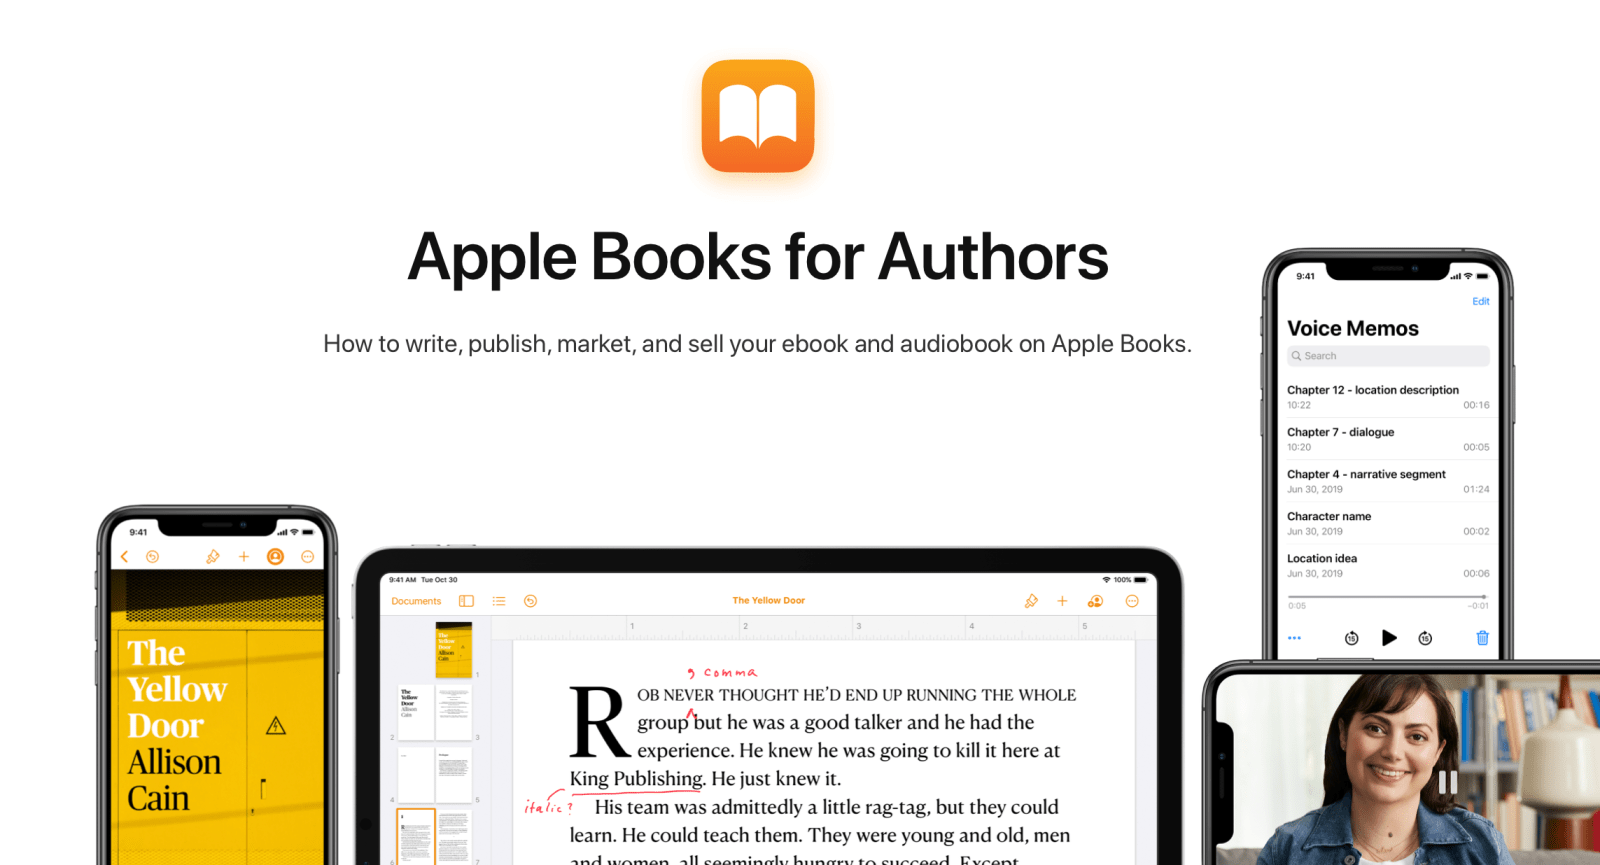 Apple Books for Authors guide